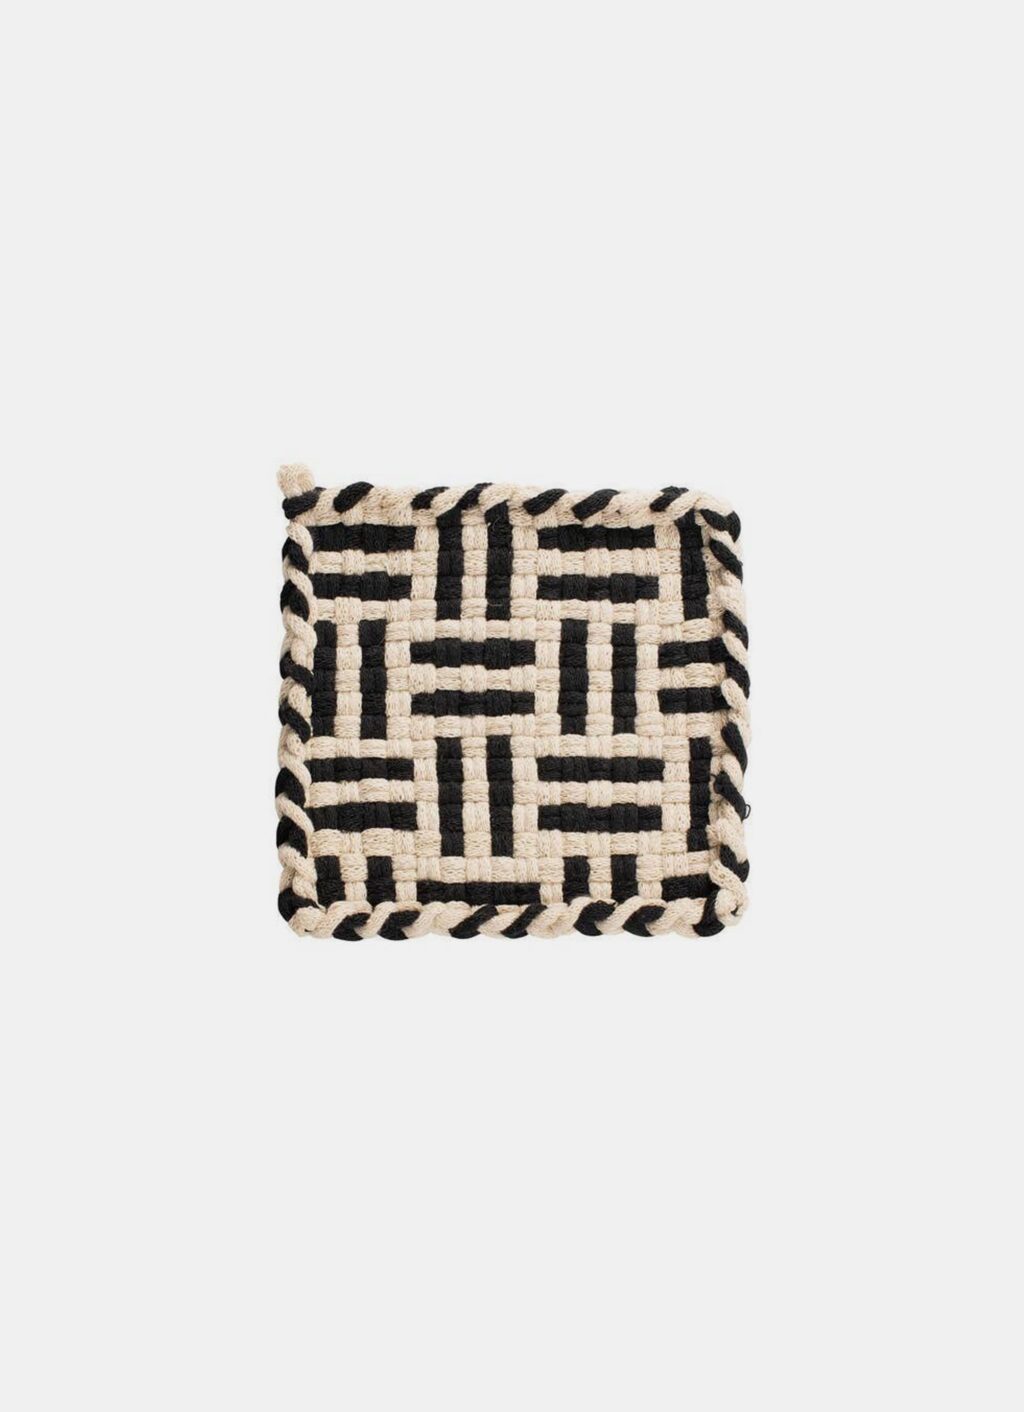 Kate Kilmurray - Handwoven Potholder - Forest Collection - Flax and Black